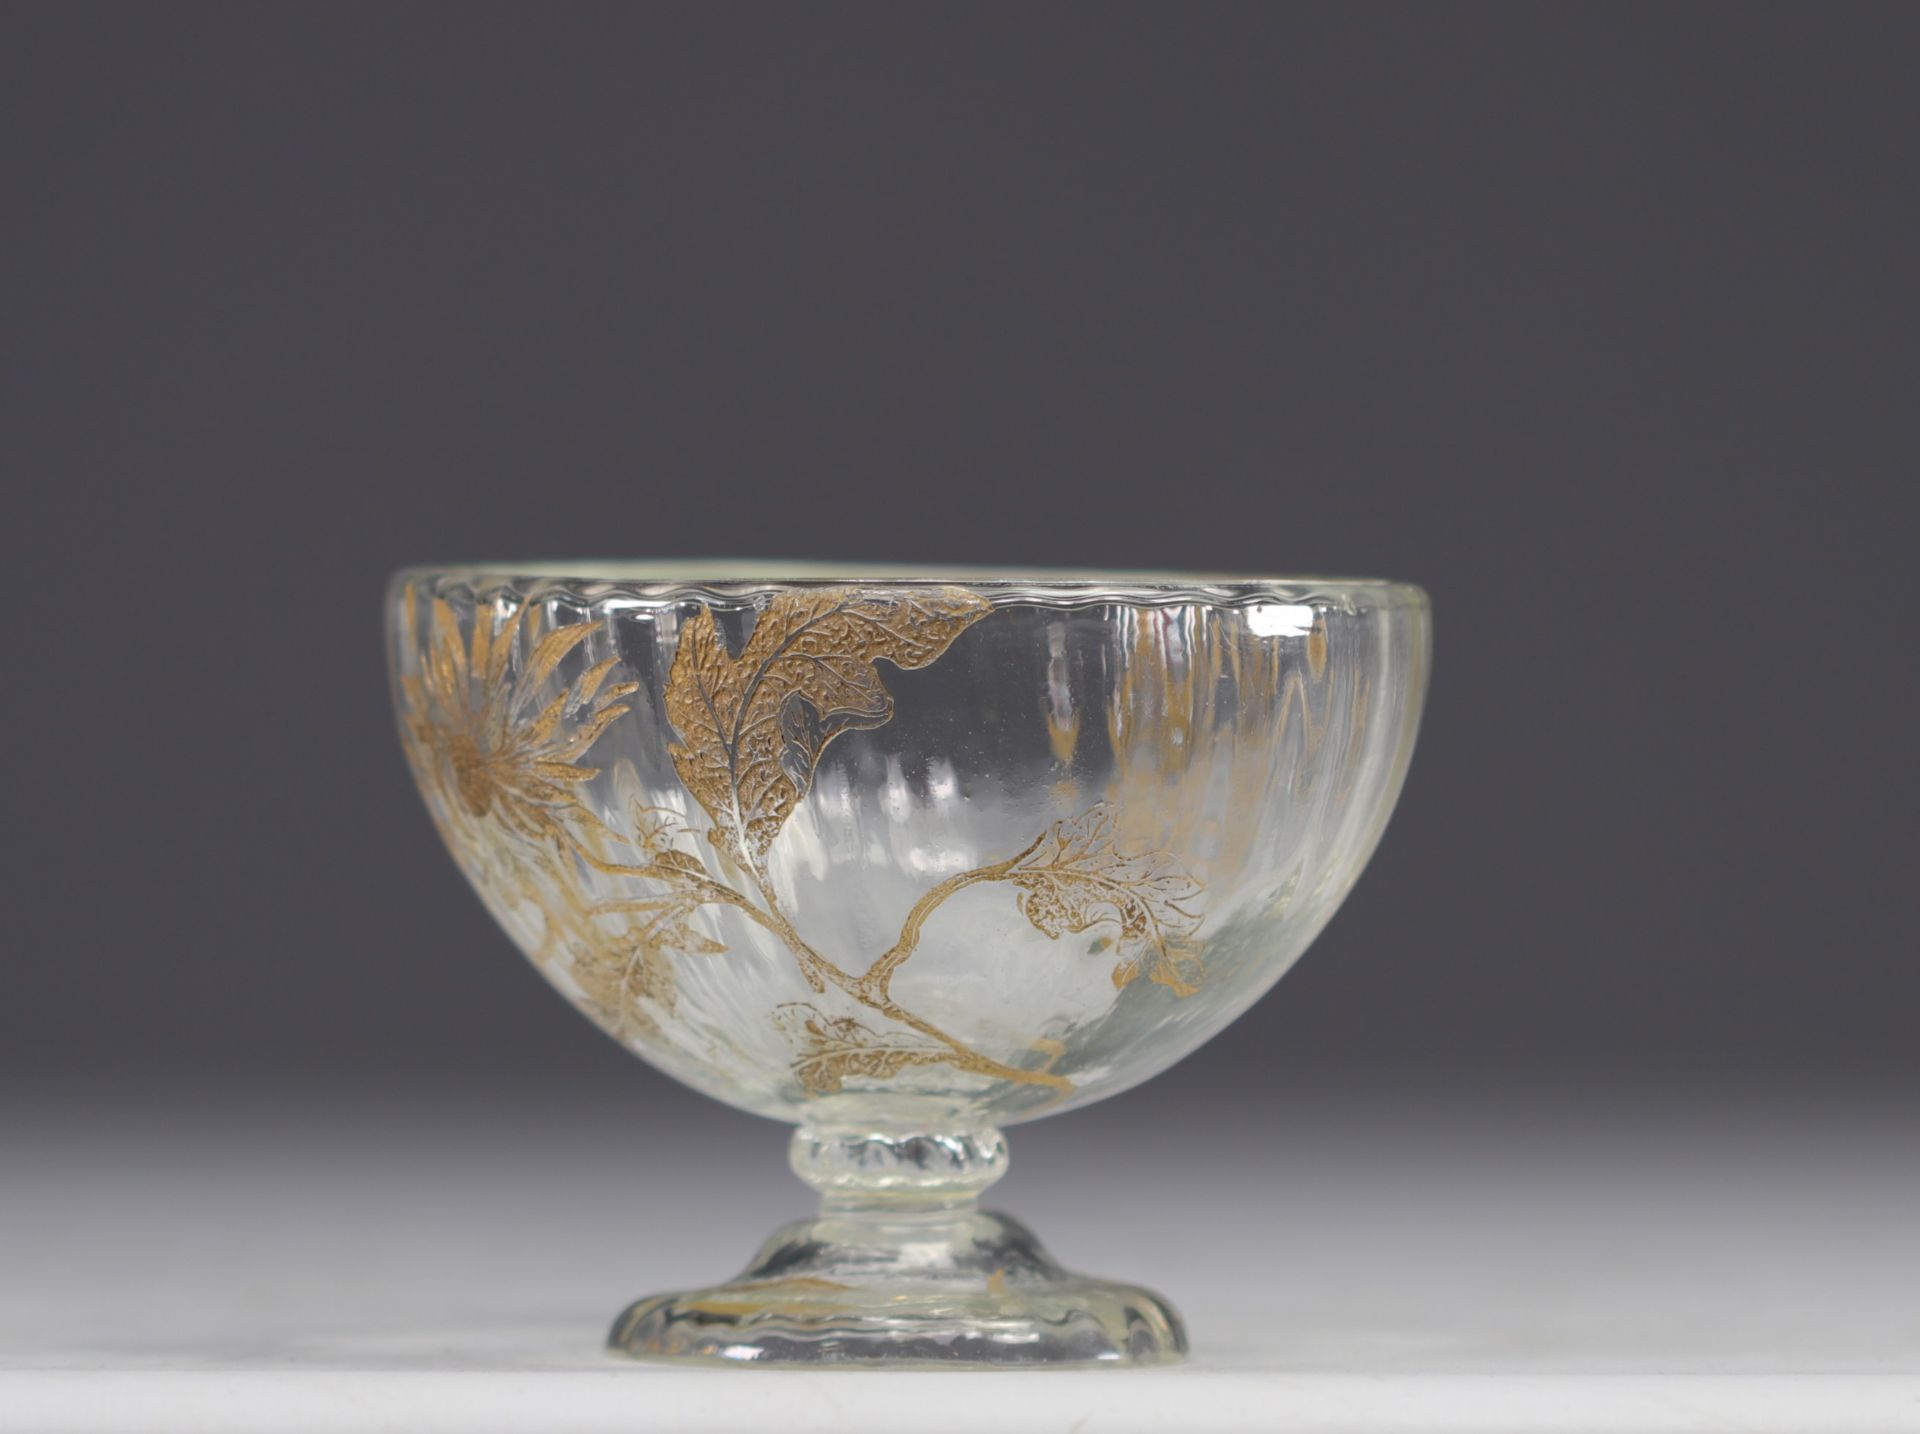 Cristallerie Emile GALLE, standing bowl decorated with gold flowers. - Image 2 of 5